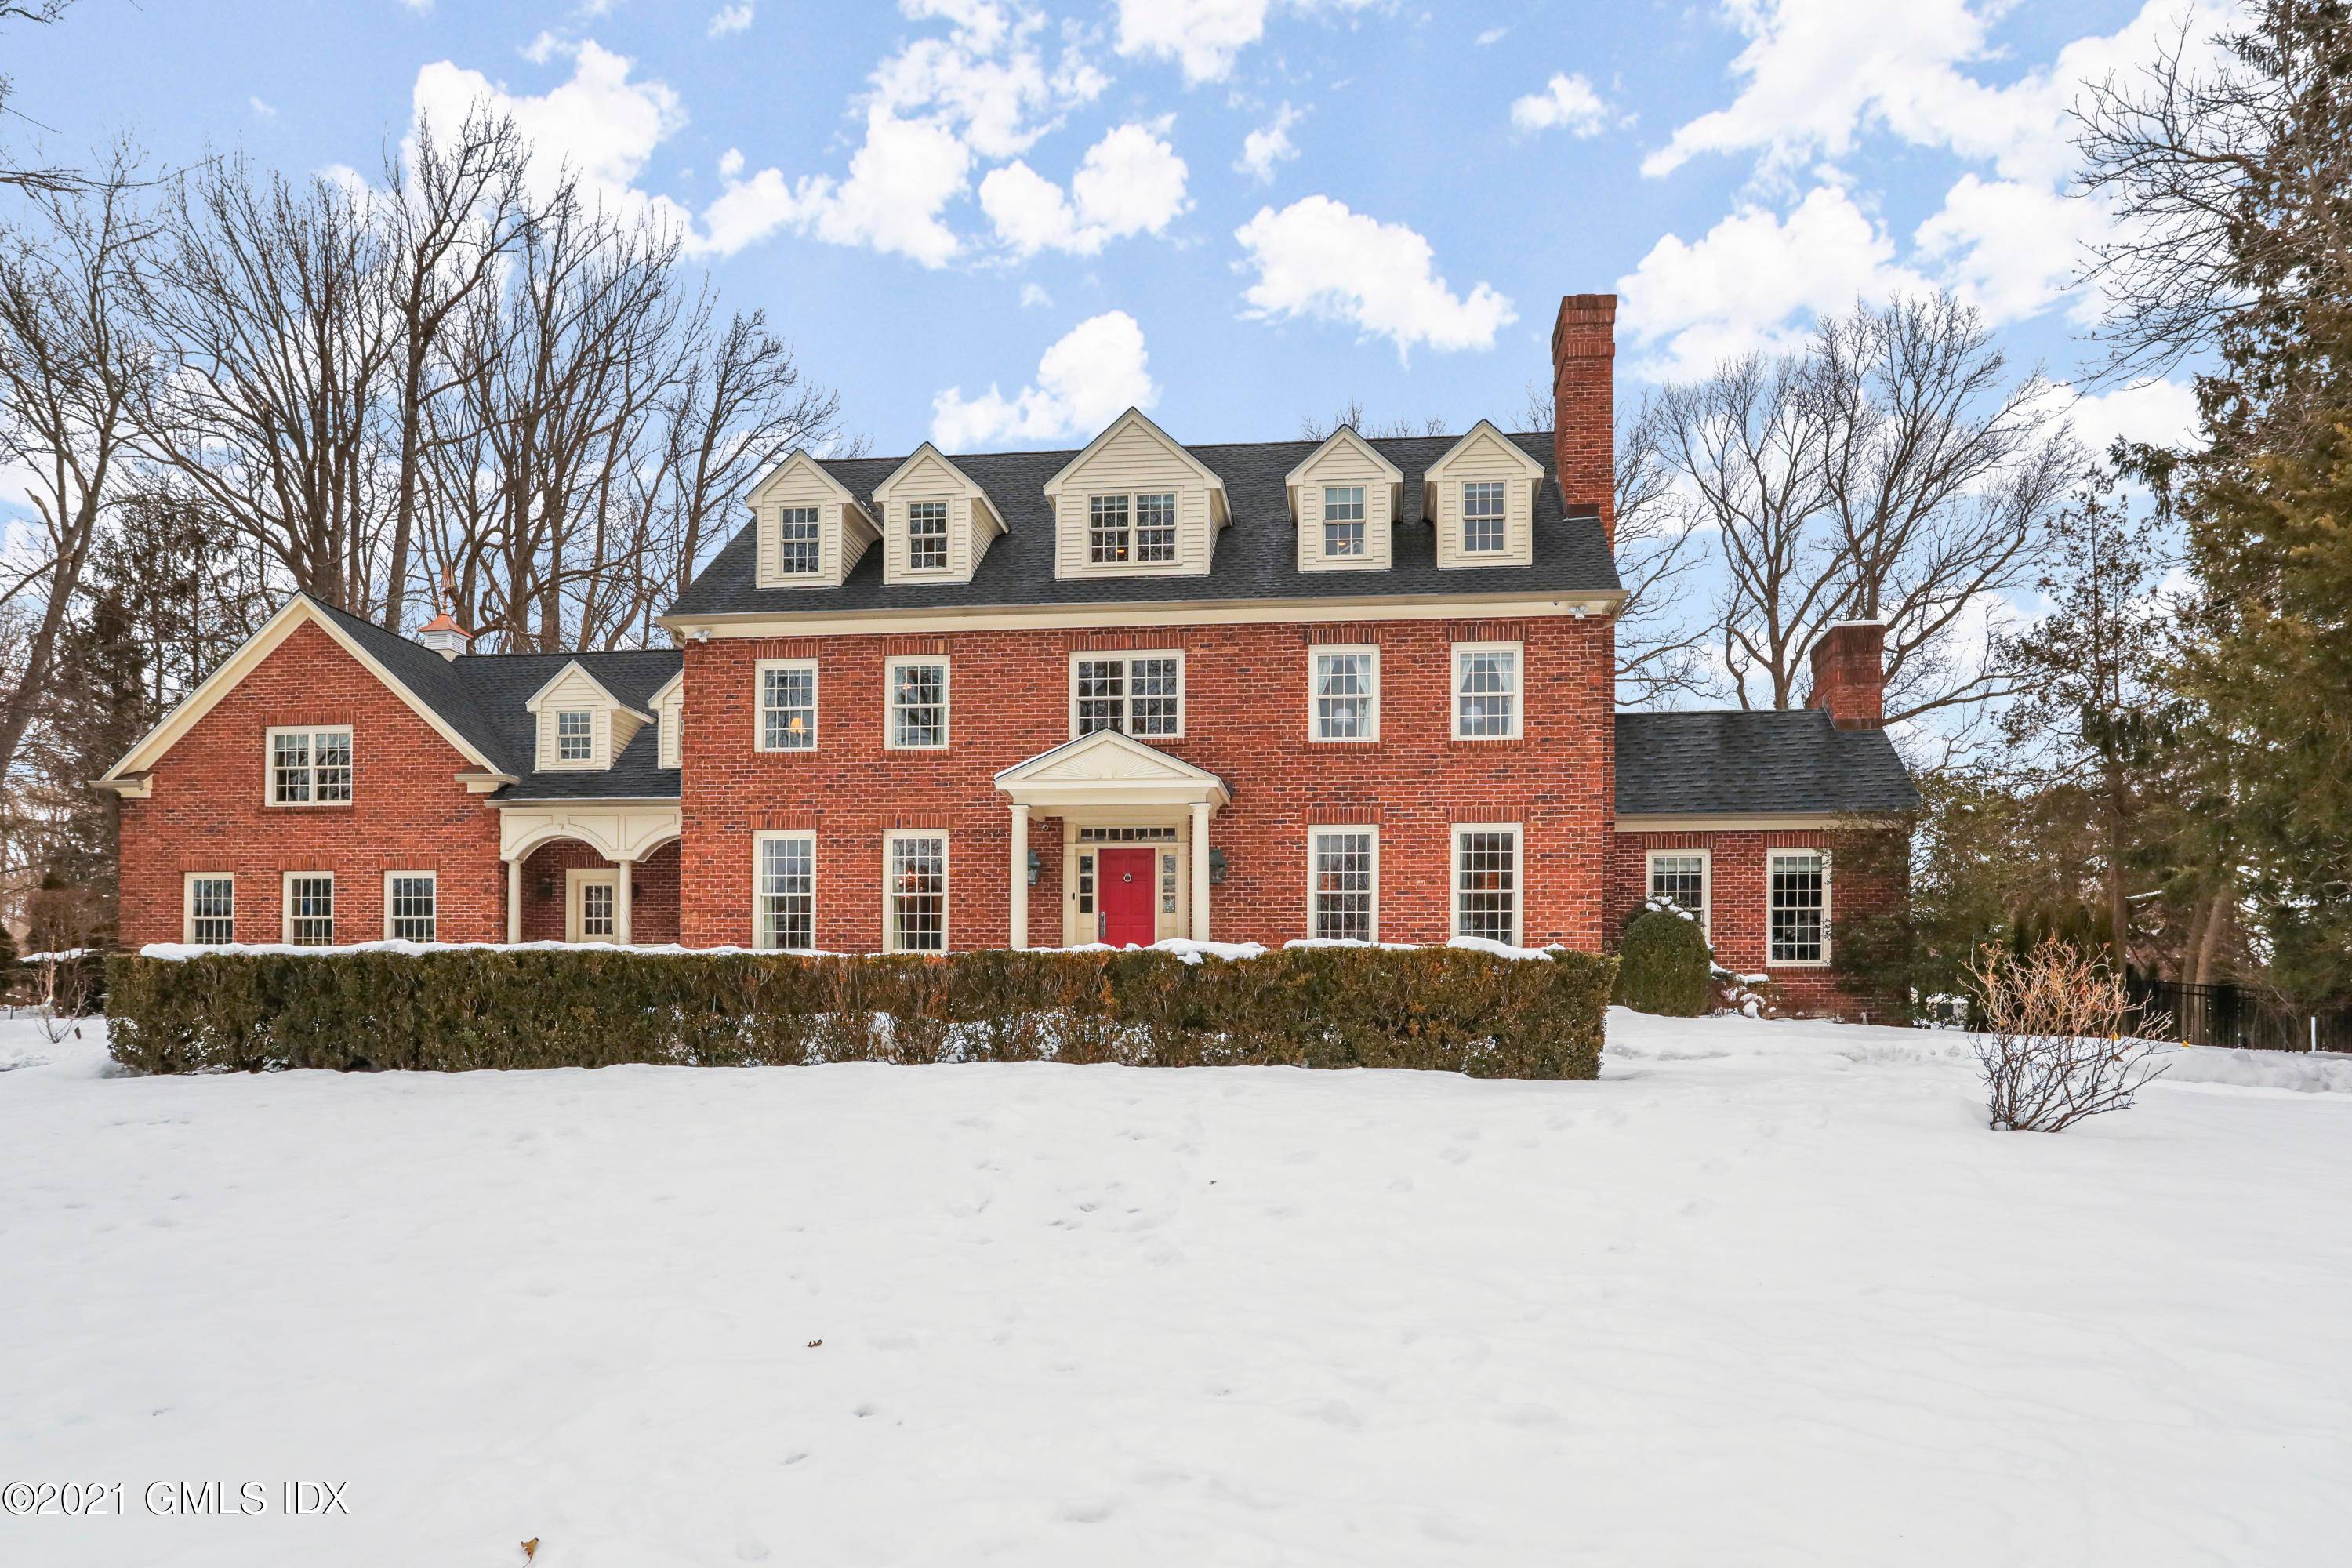 RENOVATED BRICK GEORGIAN COLONIAL ON A ONE ACRE LEVEL LOT IN PRIVATE DAWN HARBOR ASSOCIATION W WATER ACCESS.